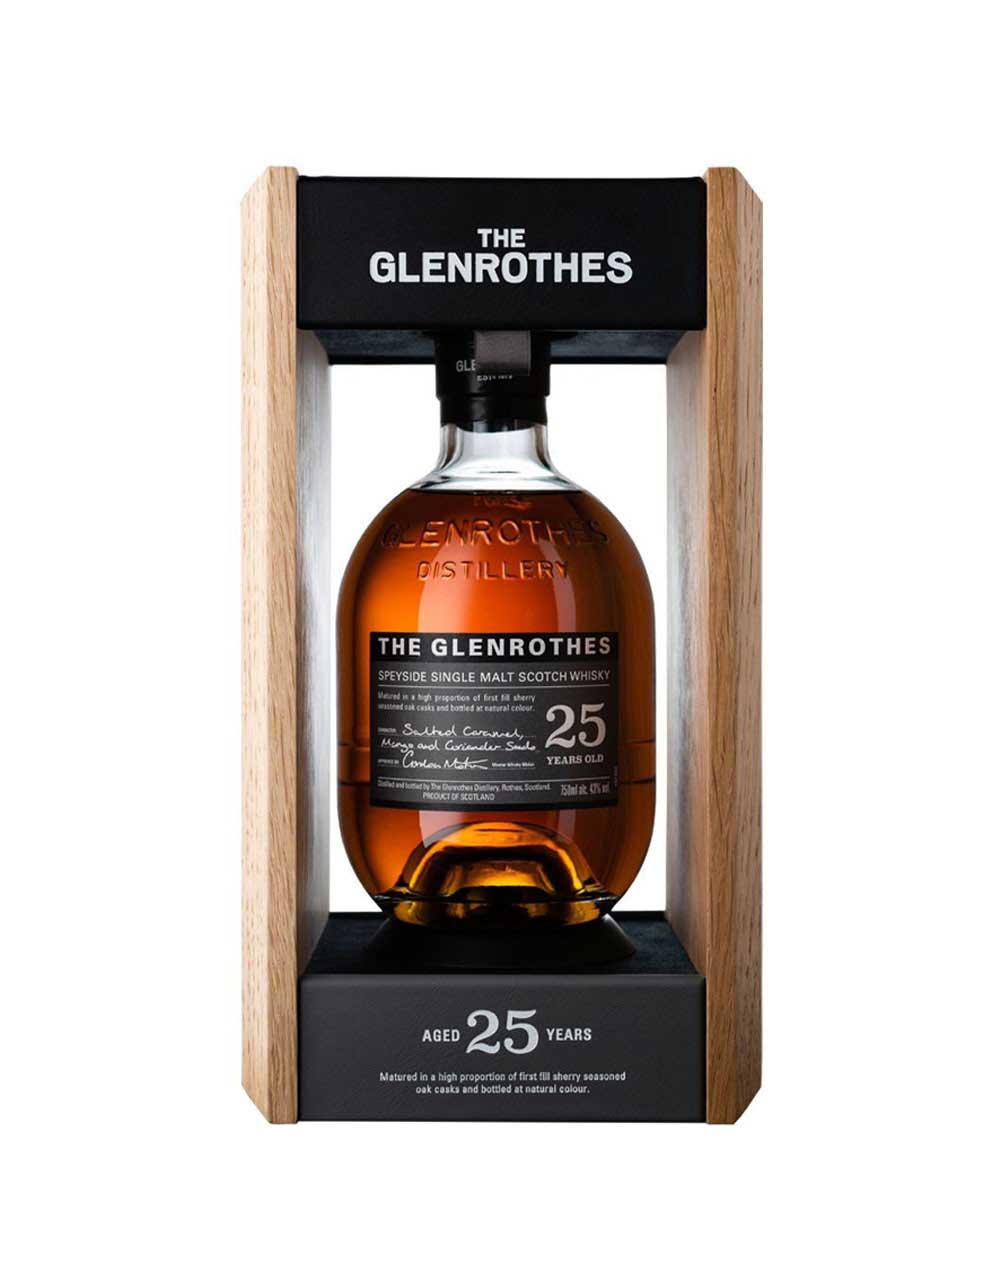 The Glenrothes 25 Year Old Scotch Whisky